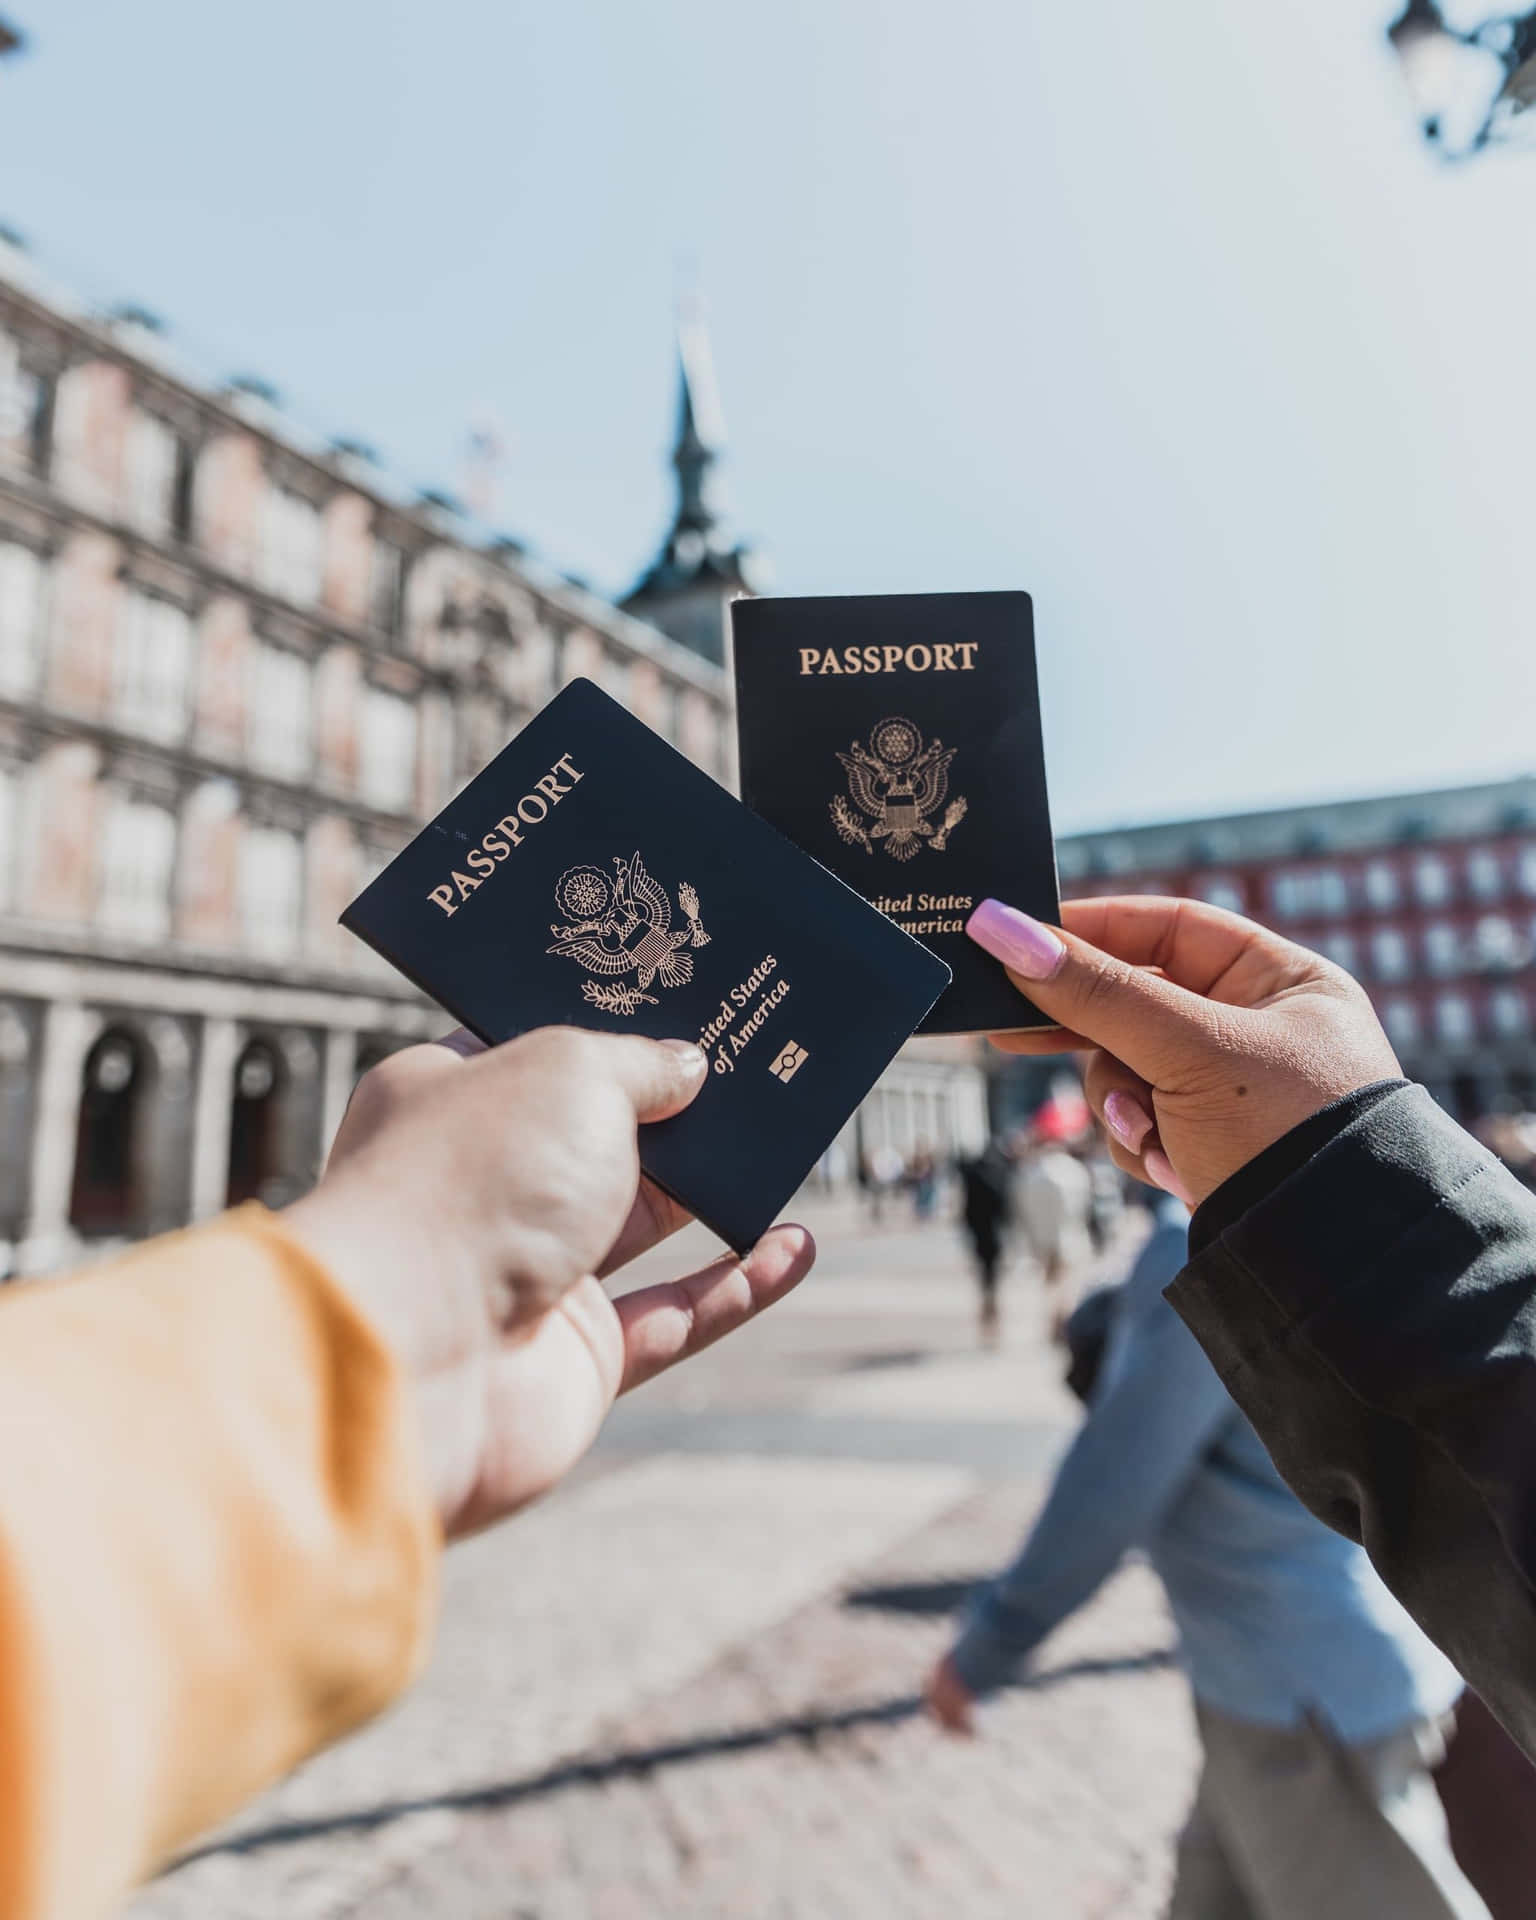 Two People Holding Passports In Front Of A Building